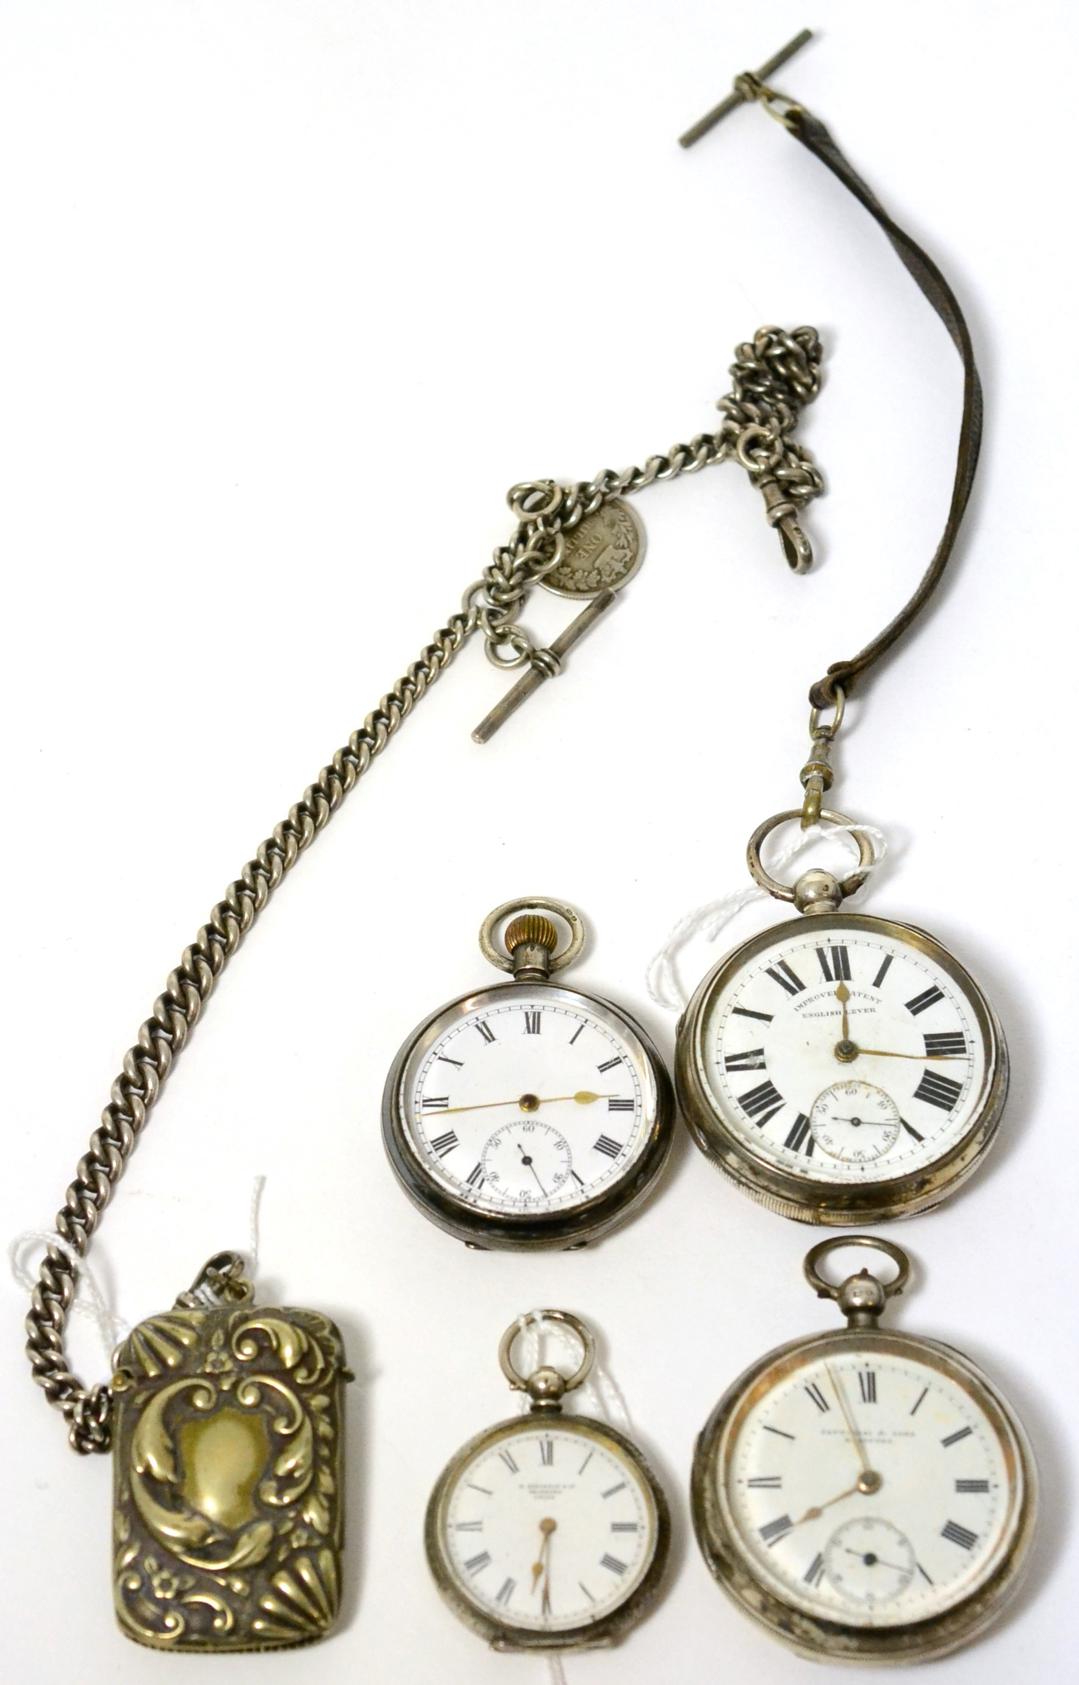 Four various silver pocket and fob watches with a vesta on chain